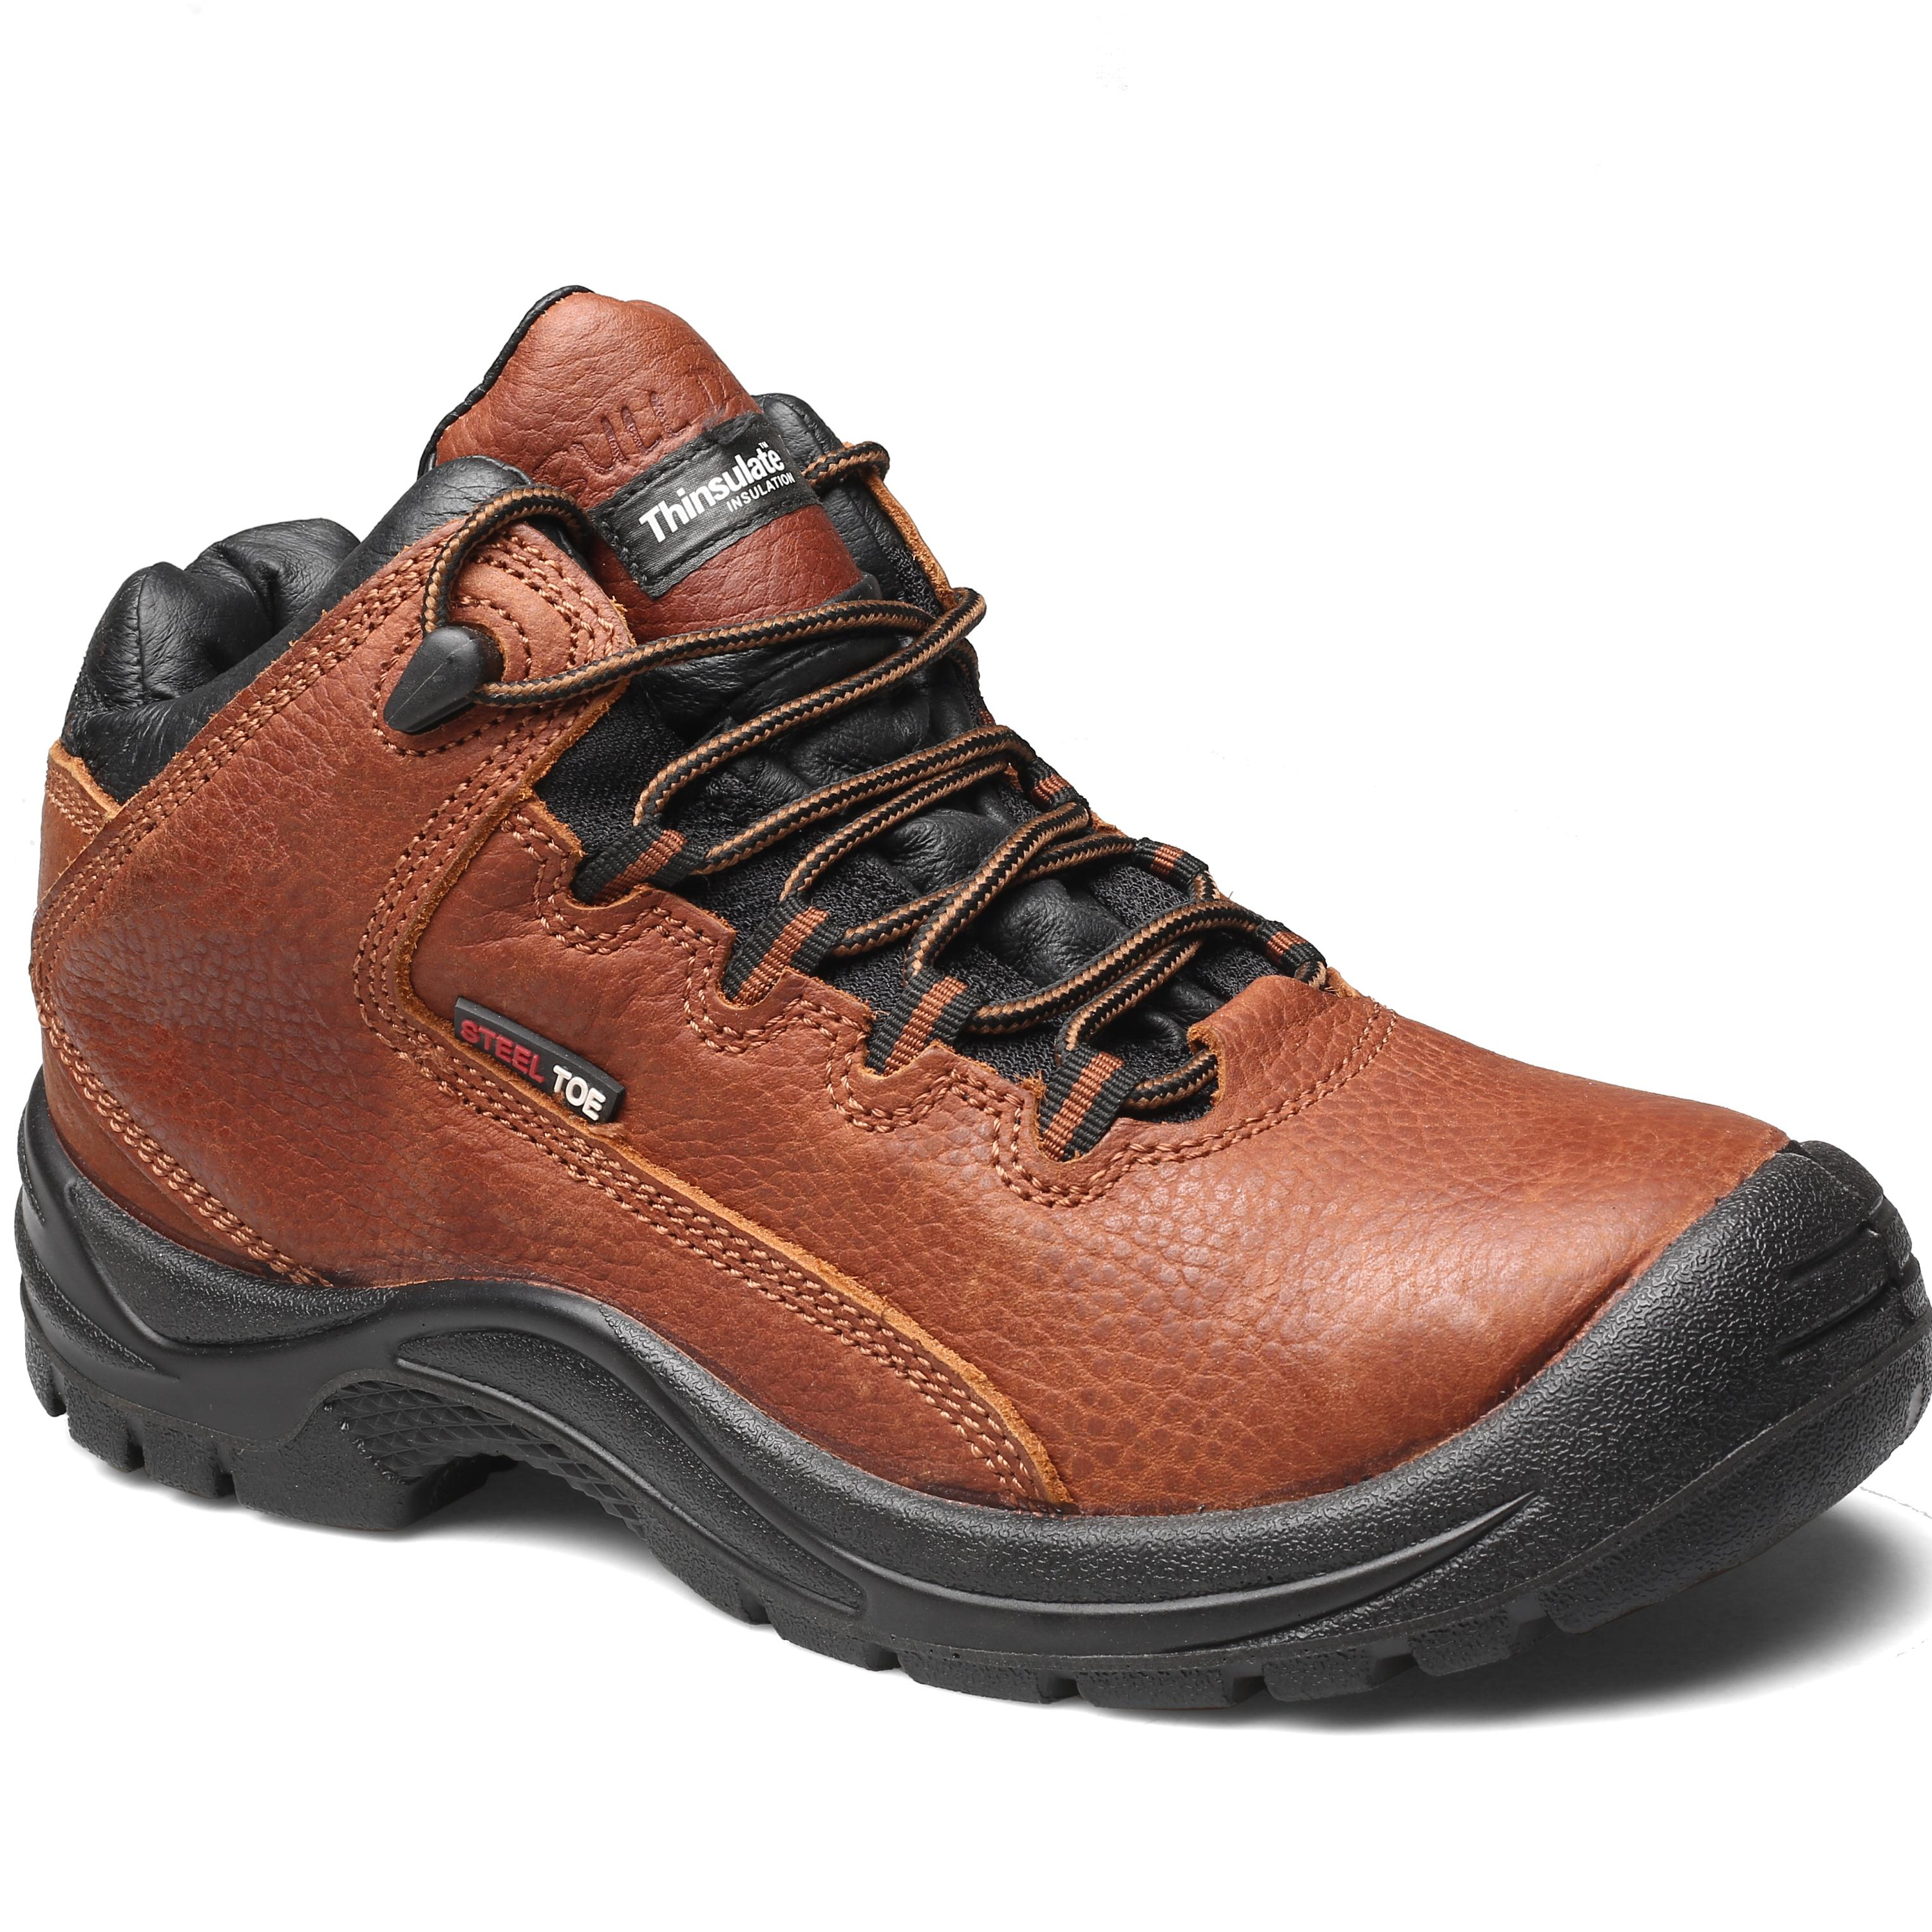 Safety Shoes Work Boots Leather made in China &steel toe